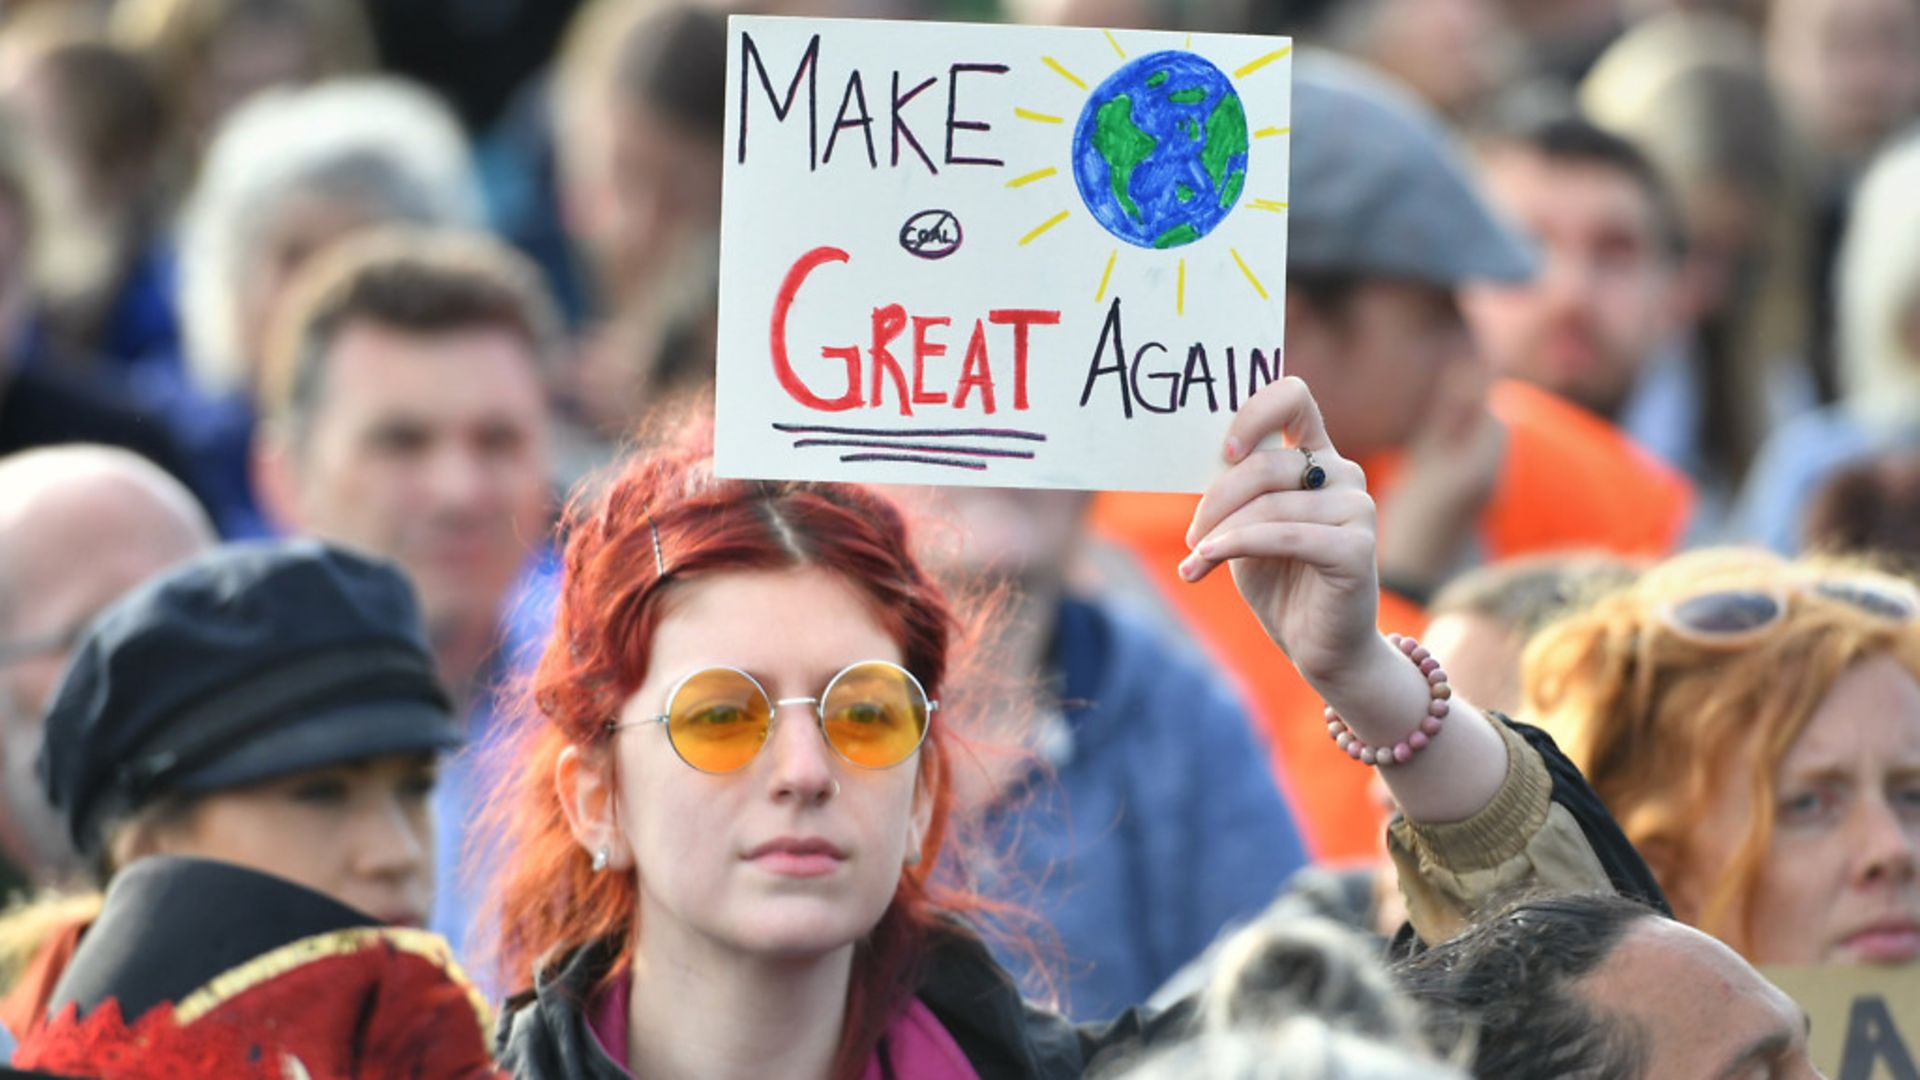 MAKE THE WORLD GREAT AGAIN: Climate change protesters in London - Credit: PA Wire/PA Images